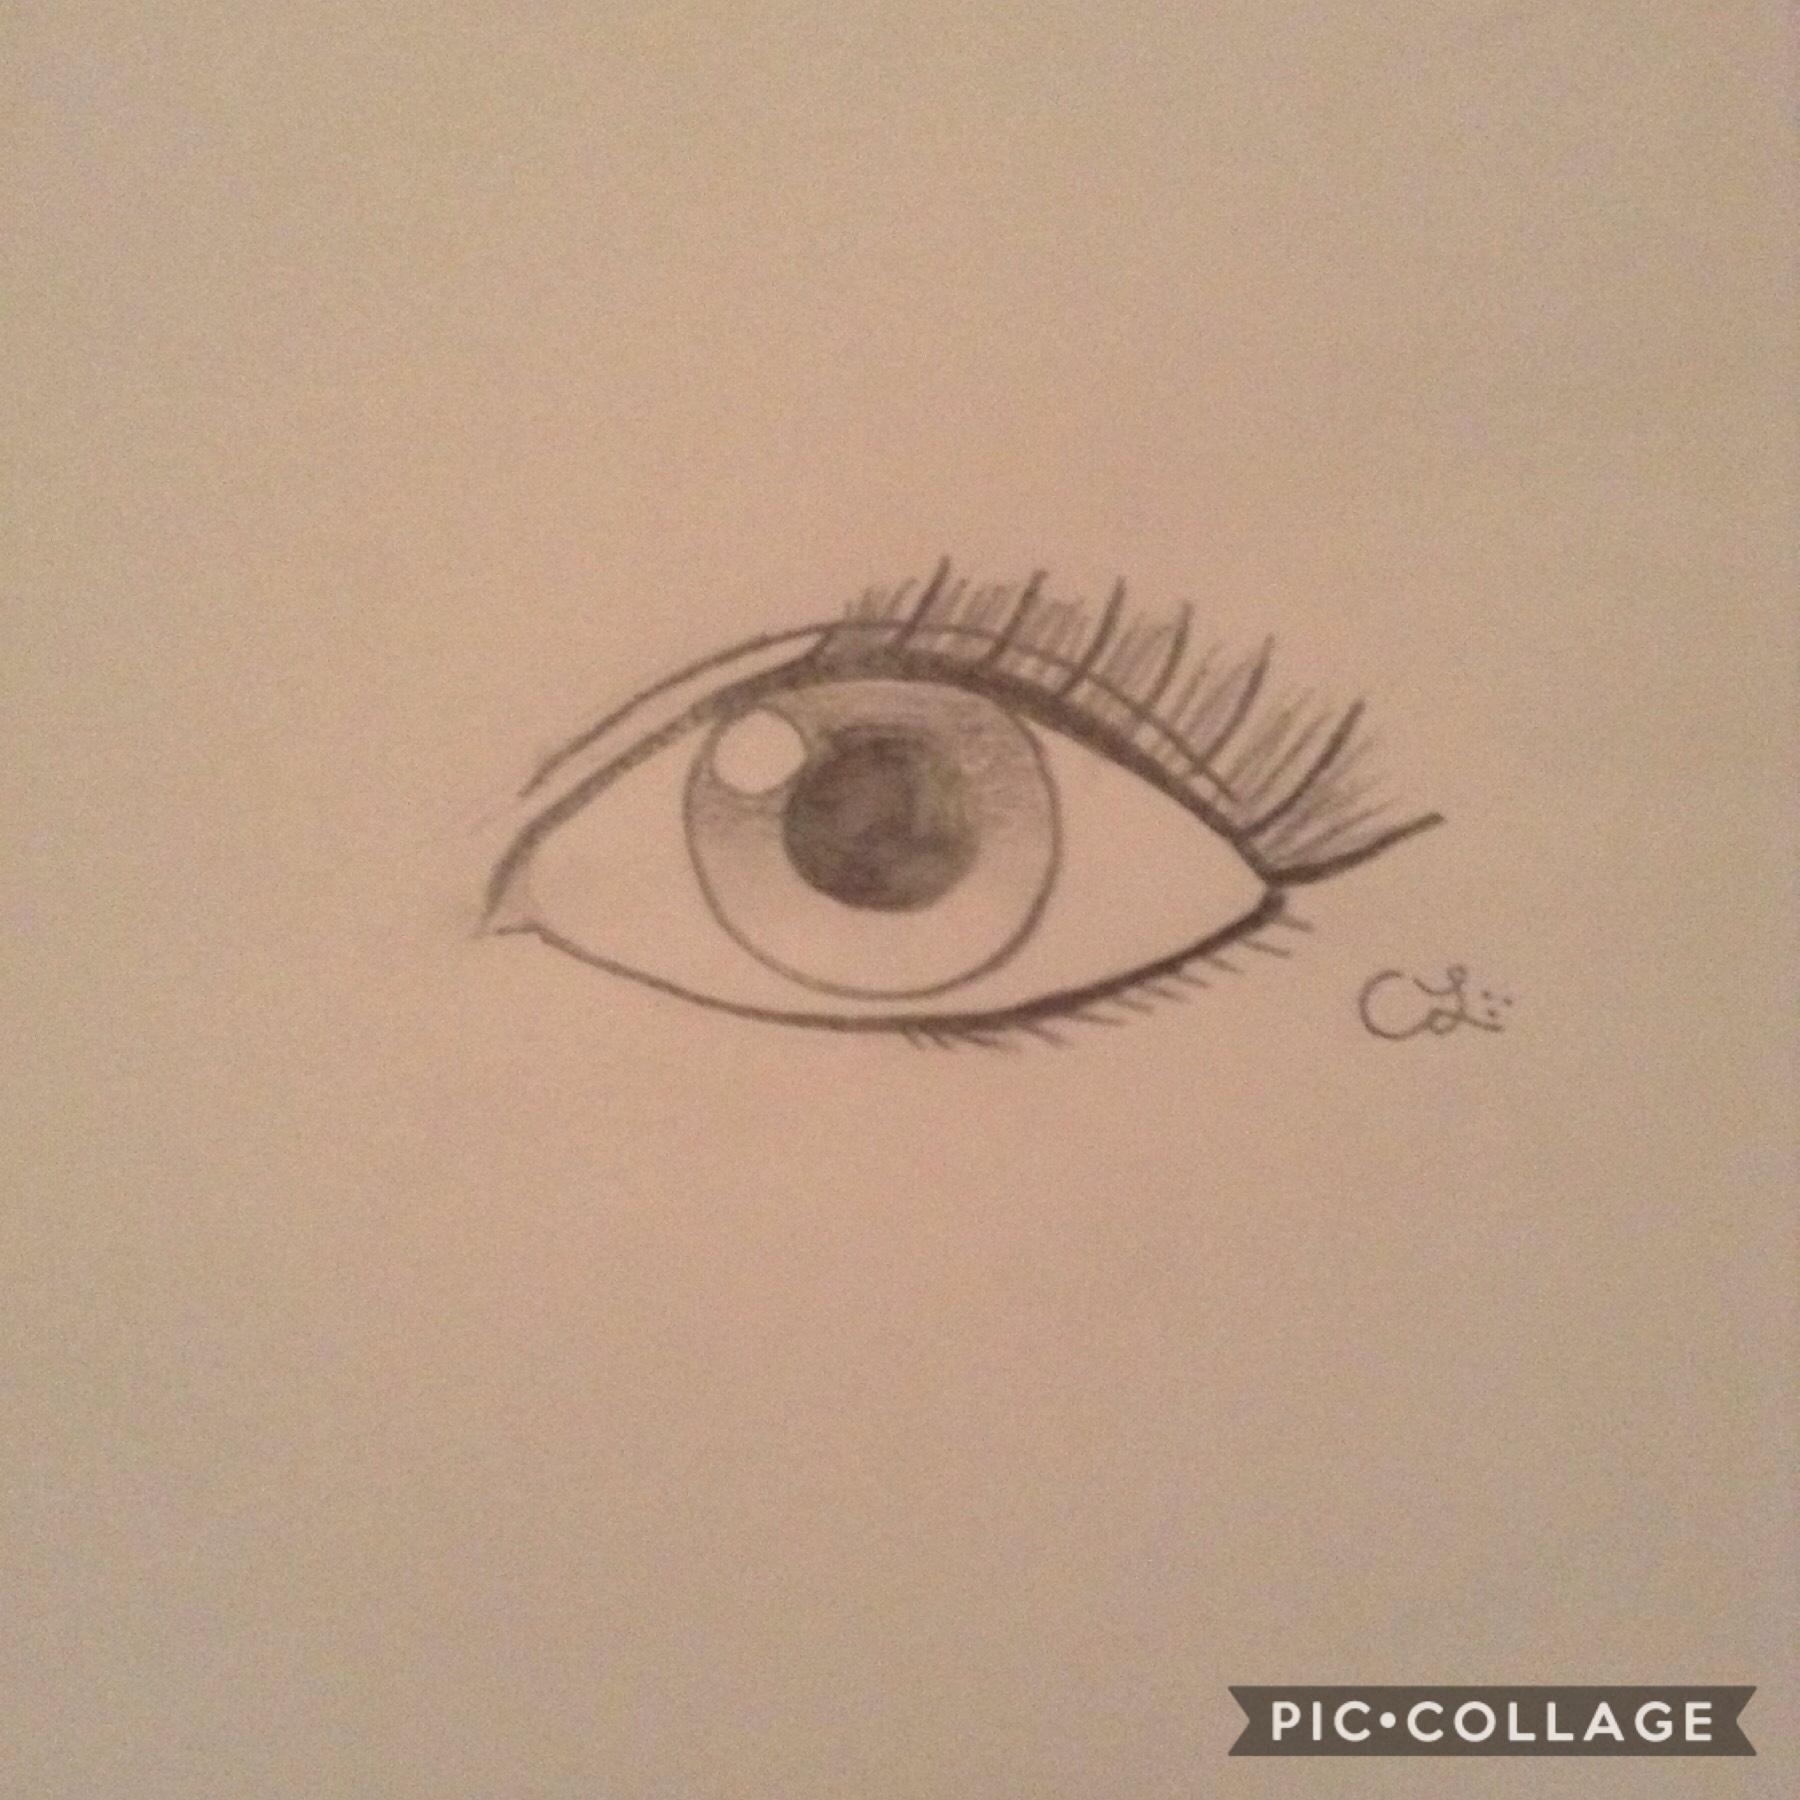 click
song rec: I Need U by BTS

yo I drew an eyeball yesterday because I got bored and had nothing to do🙃👀